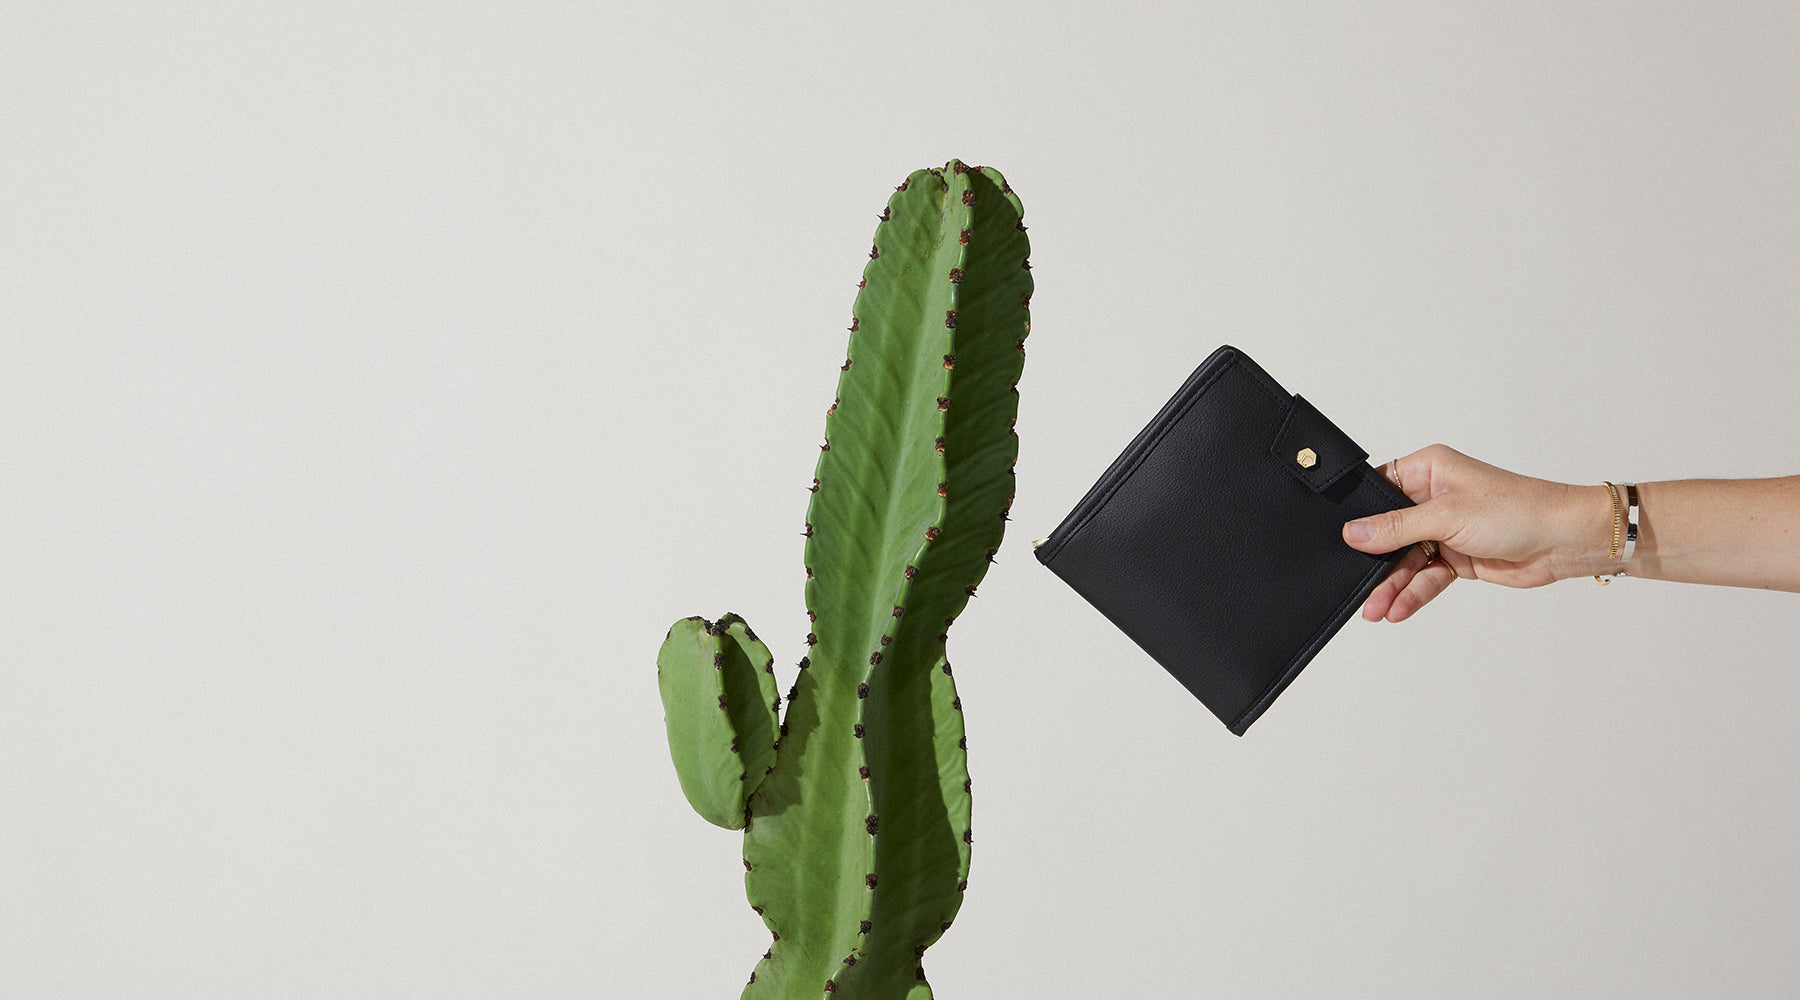 Our newest product is here! The Journey Cactus “Leather” Jewelry Pouch